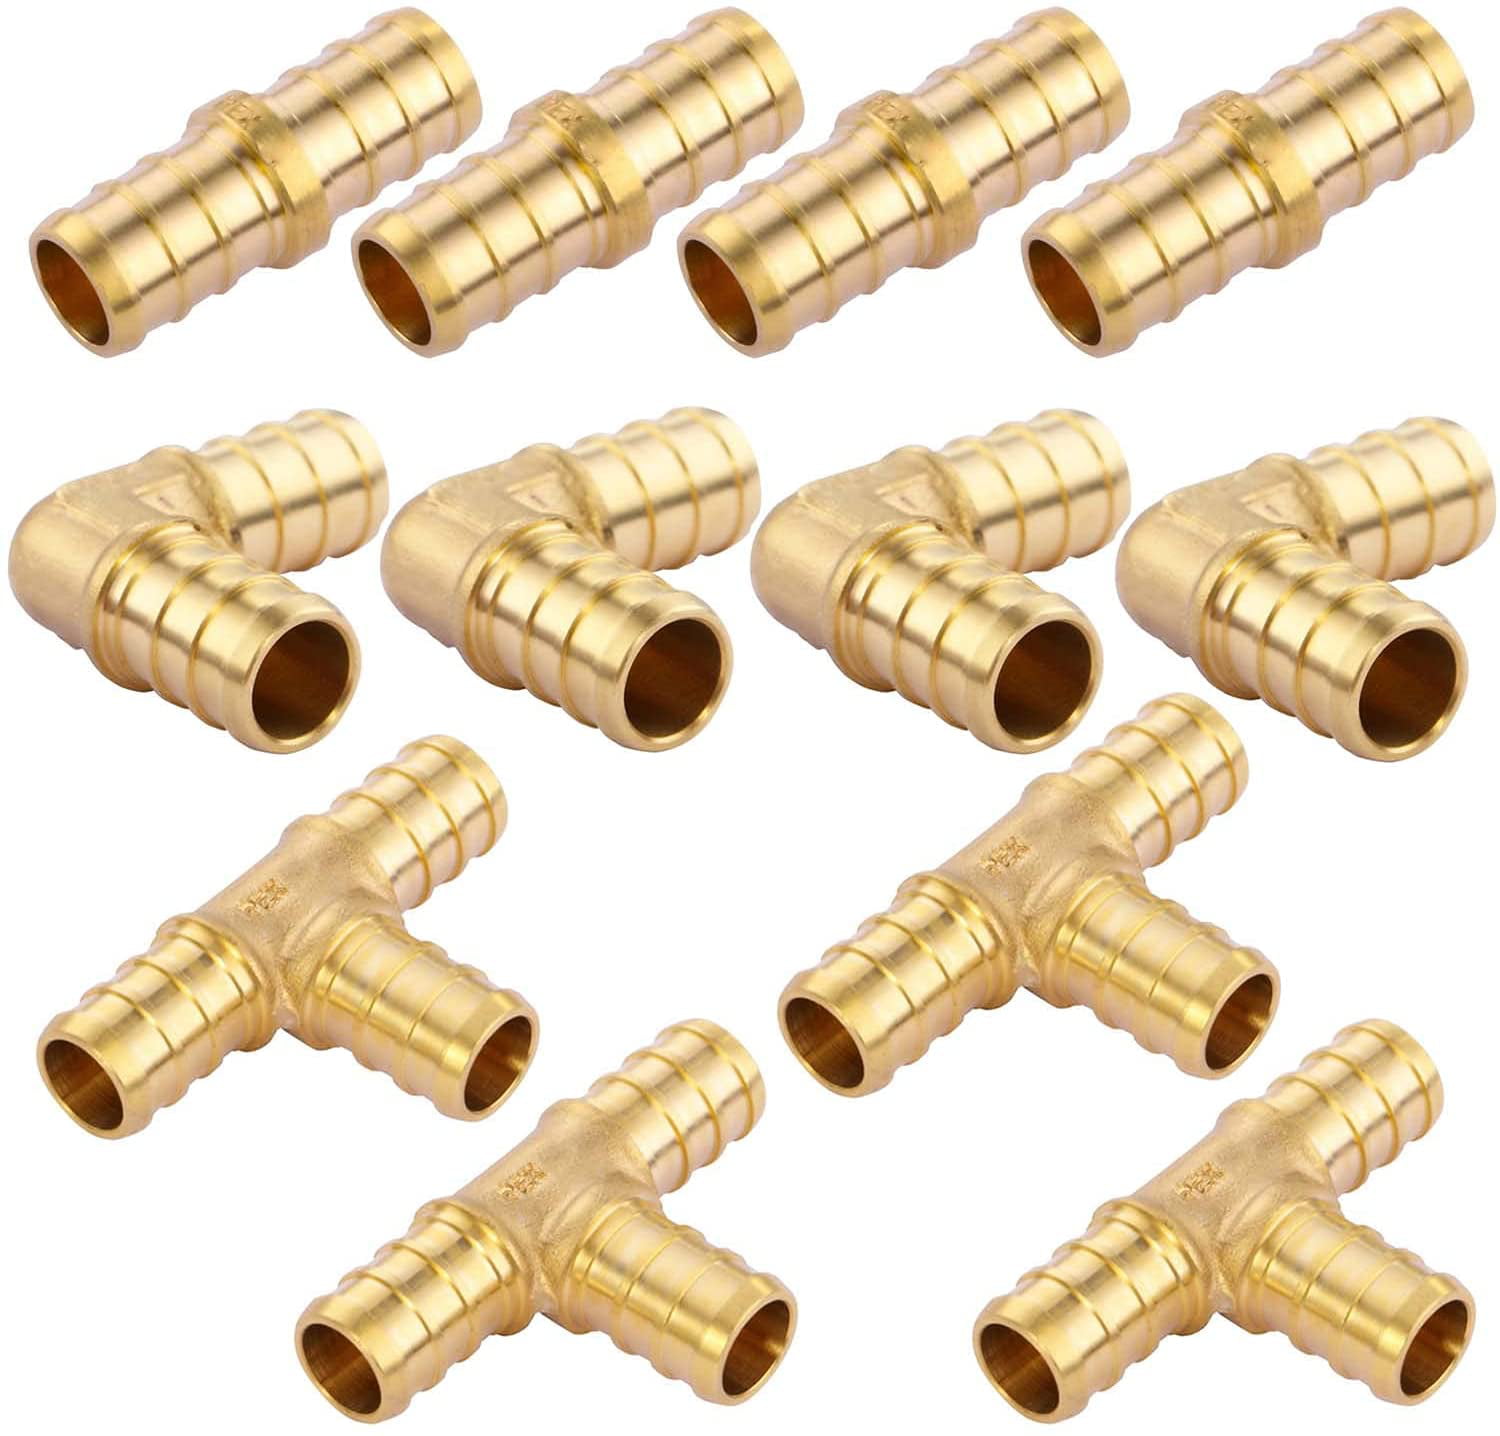 1/2" x 1/2" x 1/2" PEX Couplings Fitting Brass Crimp Fittings Lead Free 25 Piece 